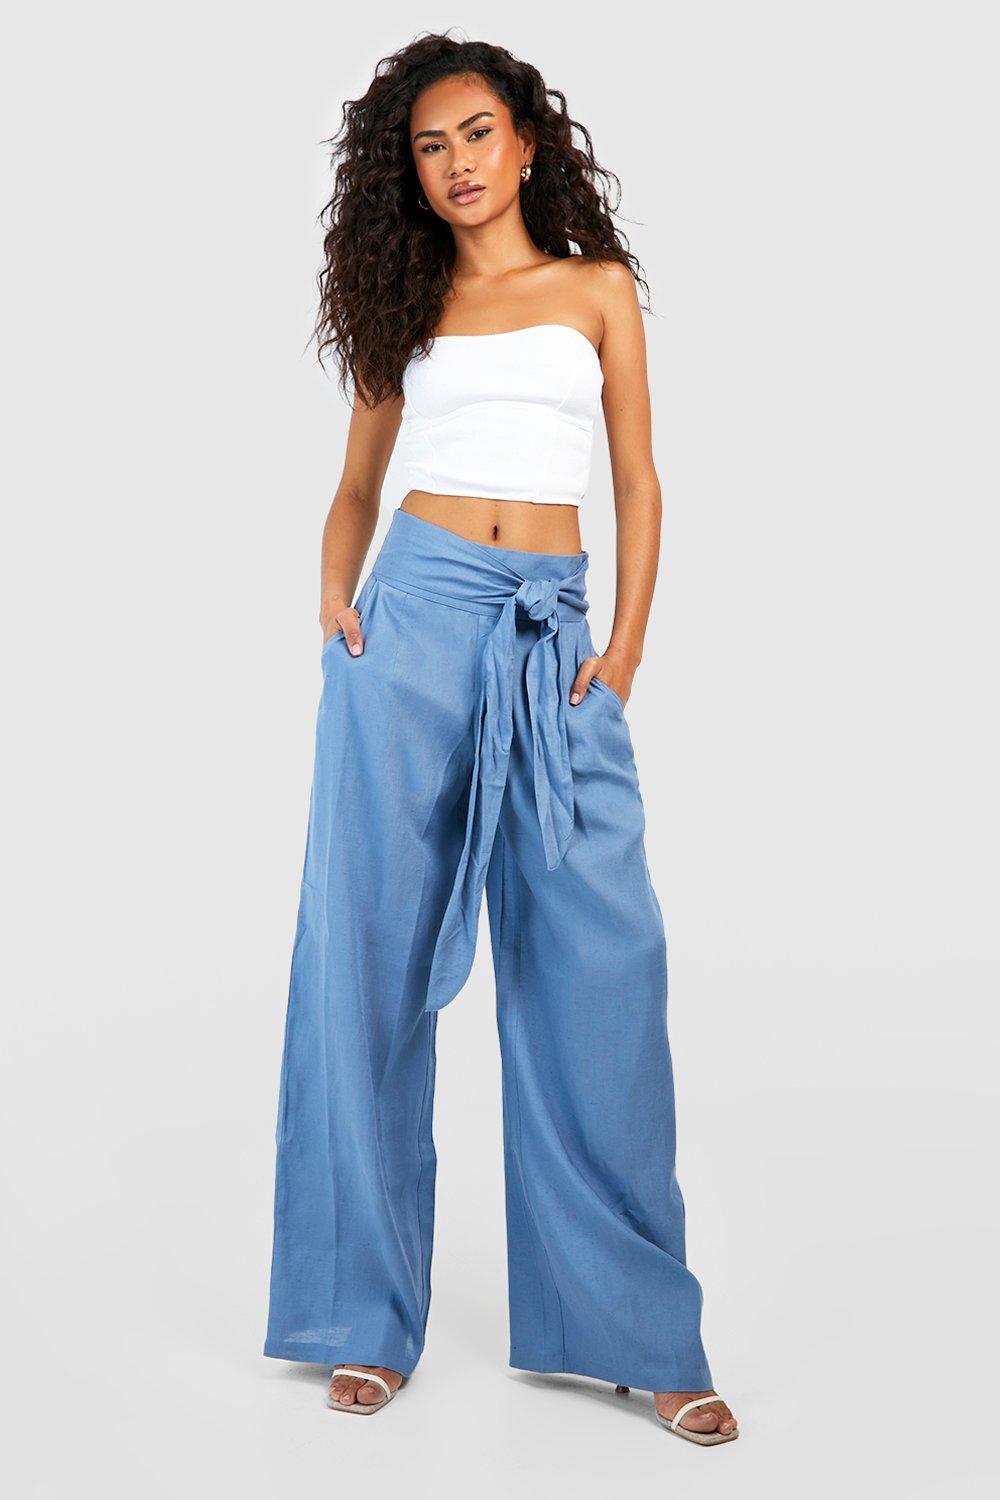 Linen High Waisted Belted Wide Leg Pants - Blue - 16 product